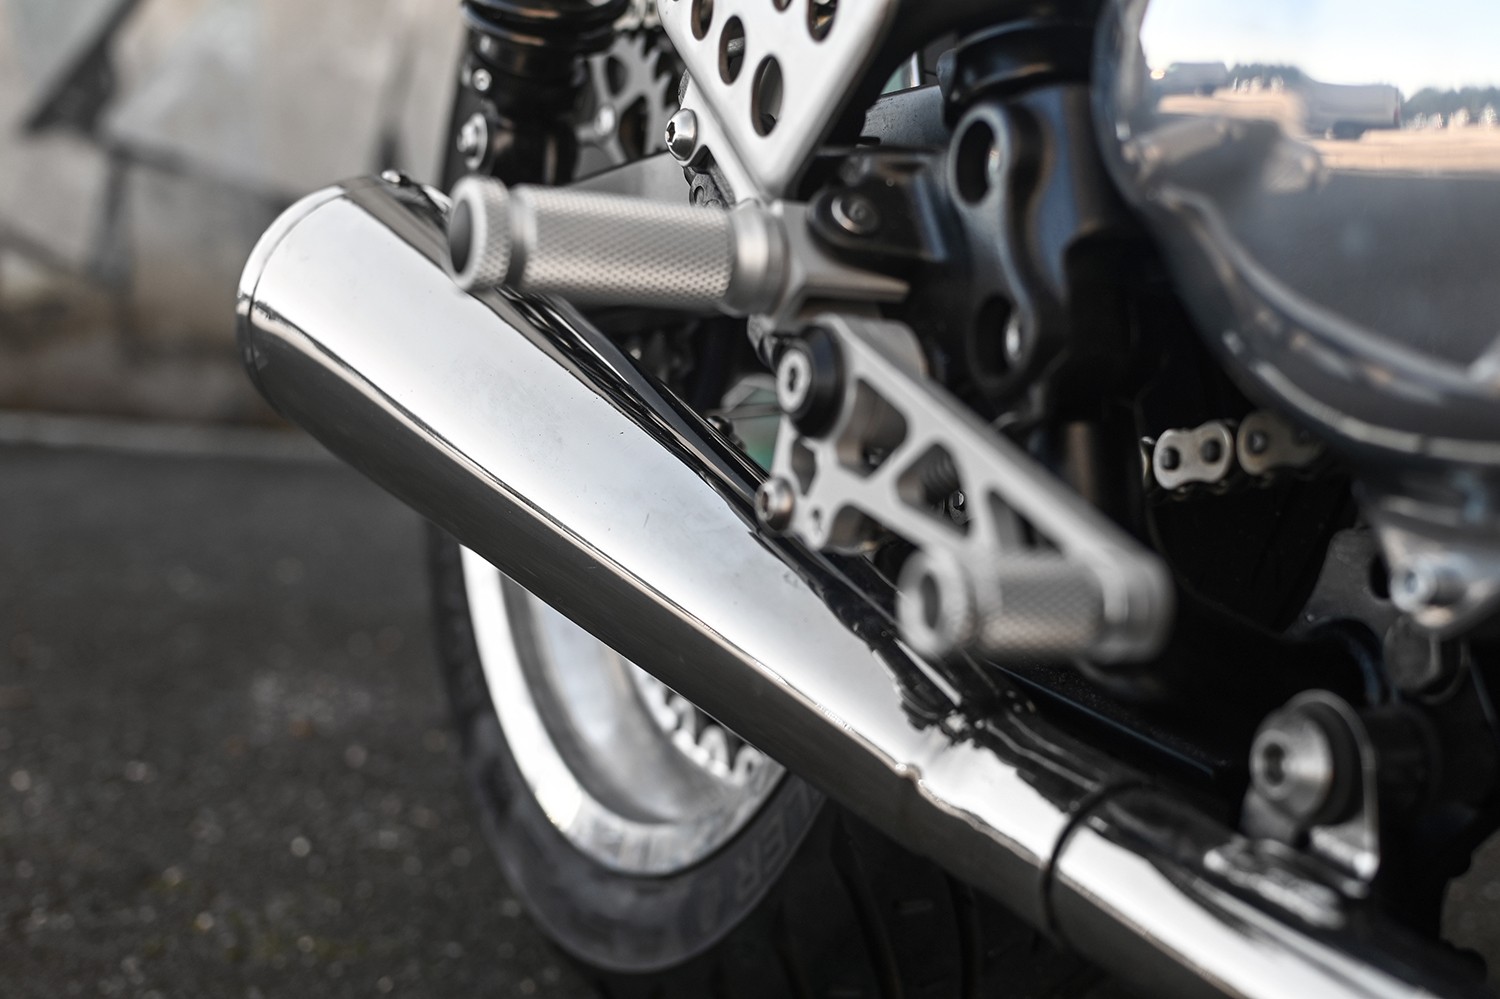 triumph thruxton lithium keeps things old school looks ready to hit the racetrack 5